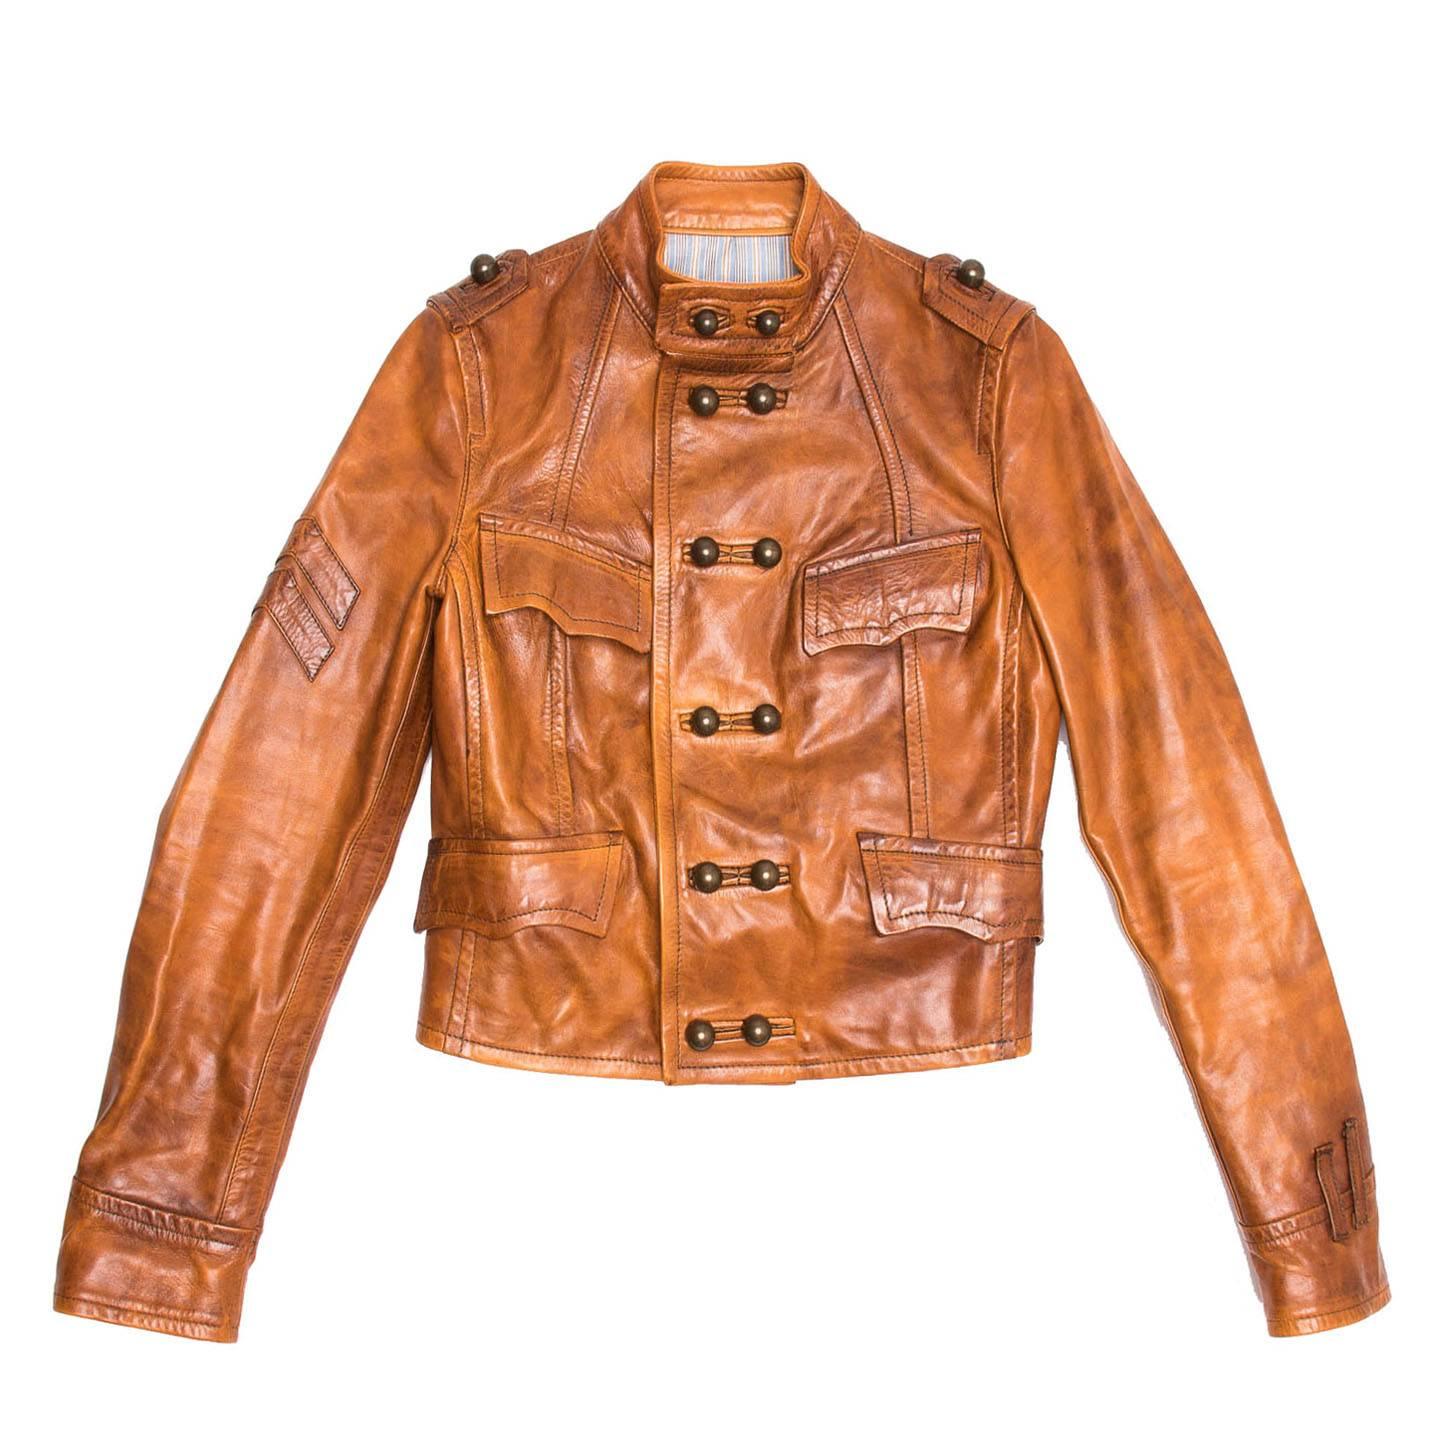 DSquared2 Sienna Leather Military Jacket